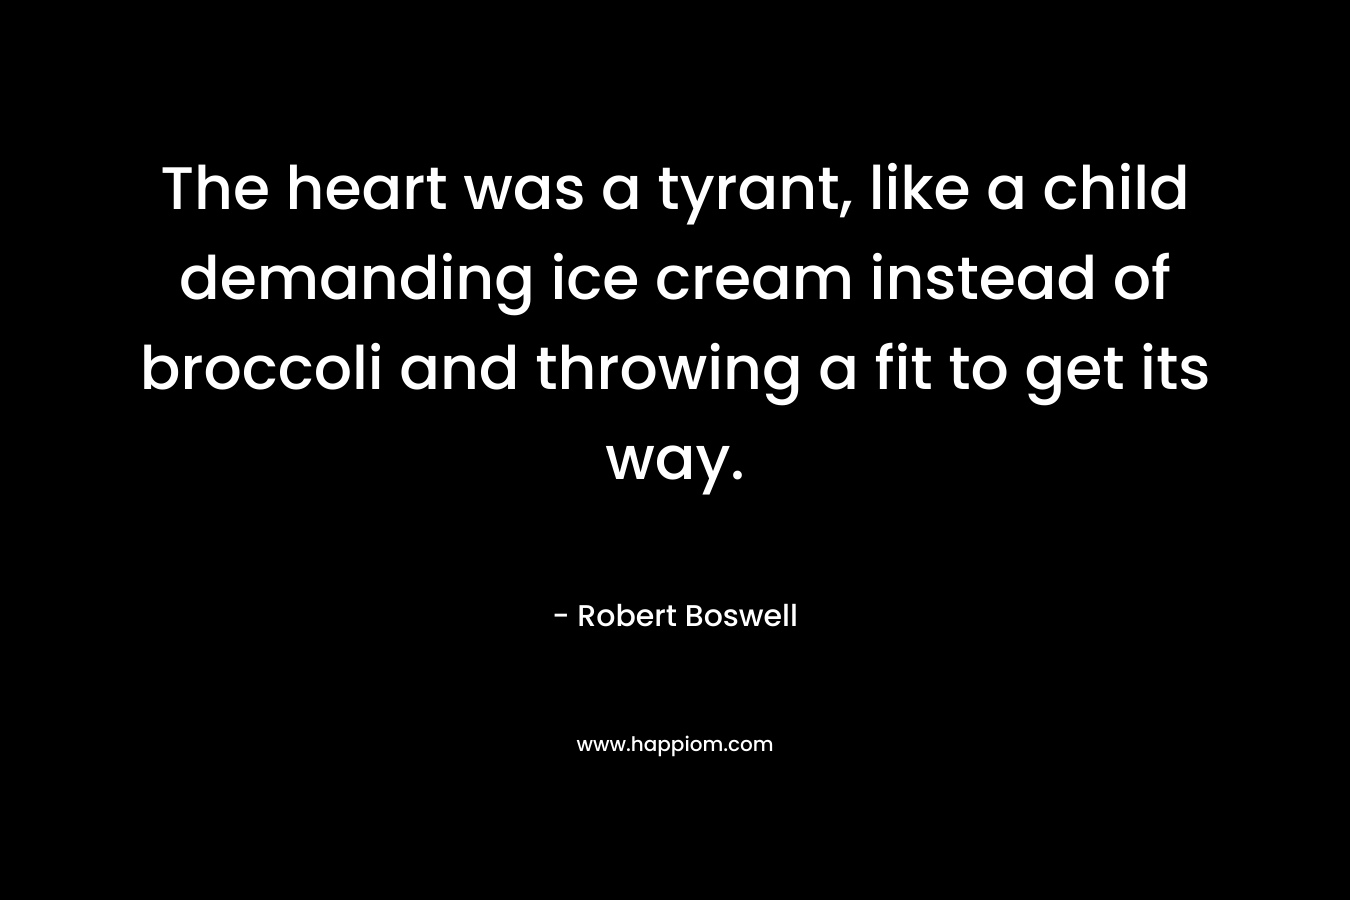 The heart was a tyrant, like a child demanding ice cream instead of broccoli and throwing a fit to get its way. – Robert Boswell